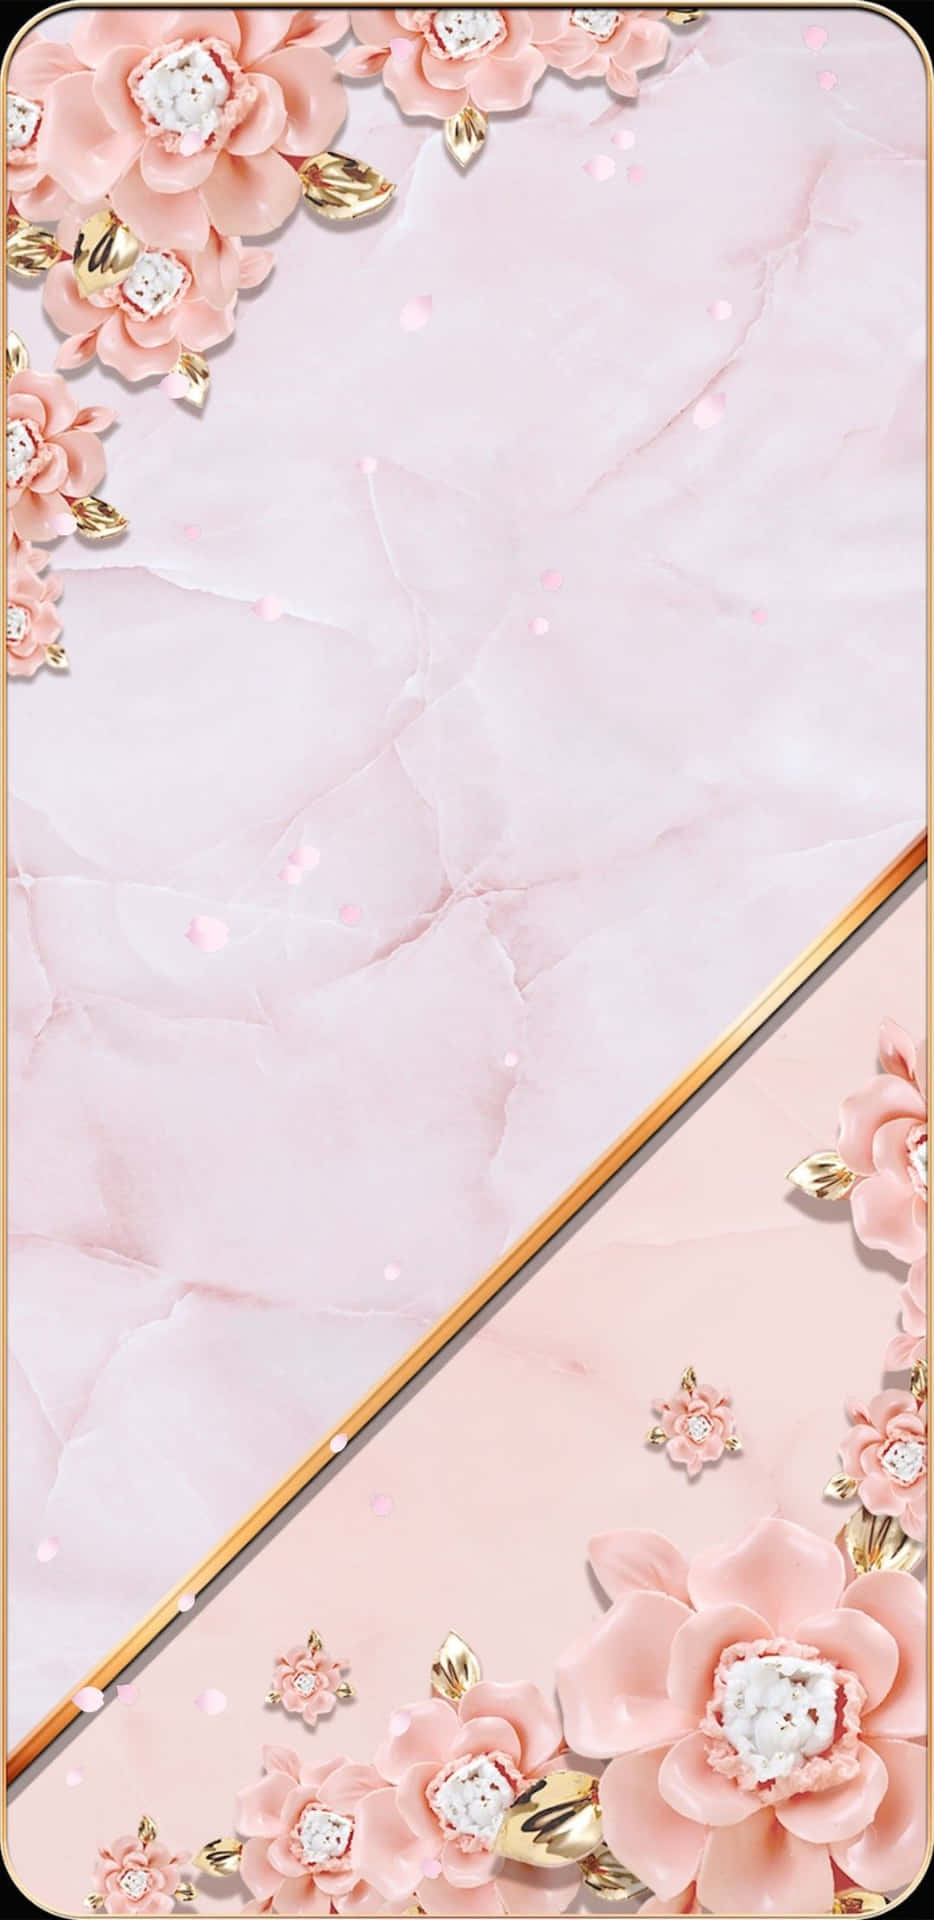 Image Beautiful Rose Gold Phone On A Marble Desk With A Butterfly And A Macaron Cookie Background